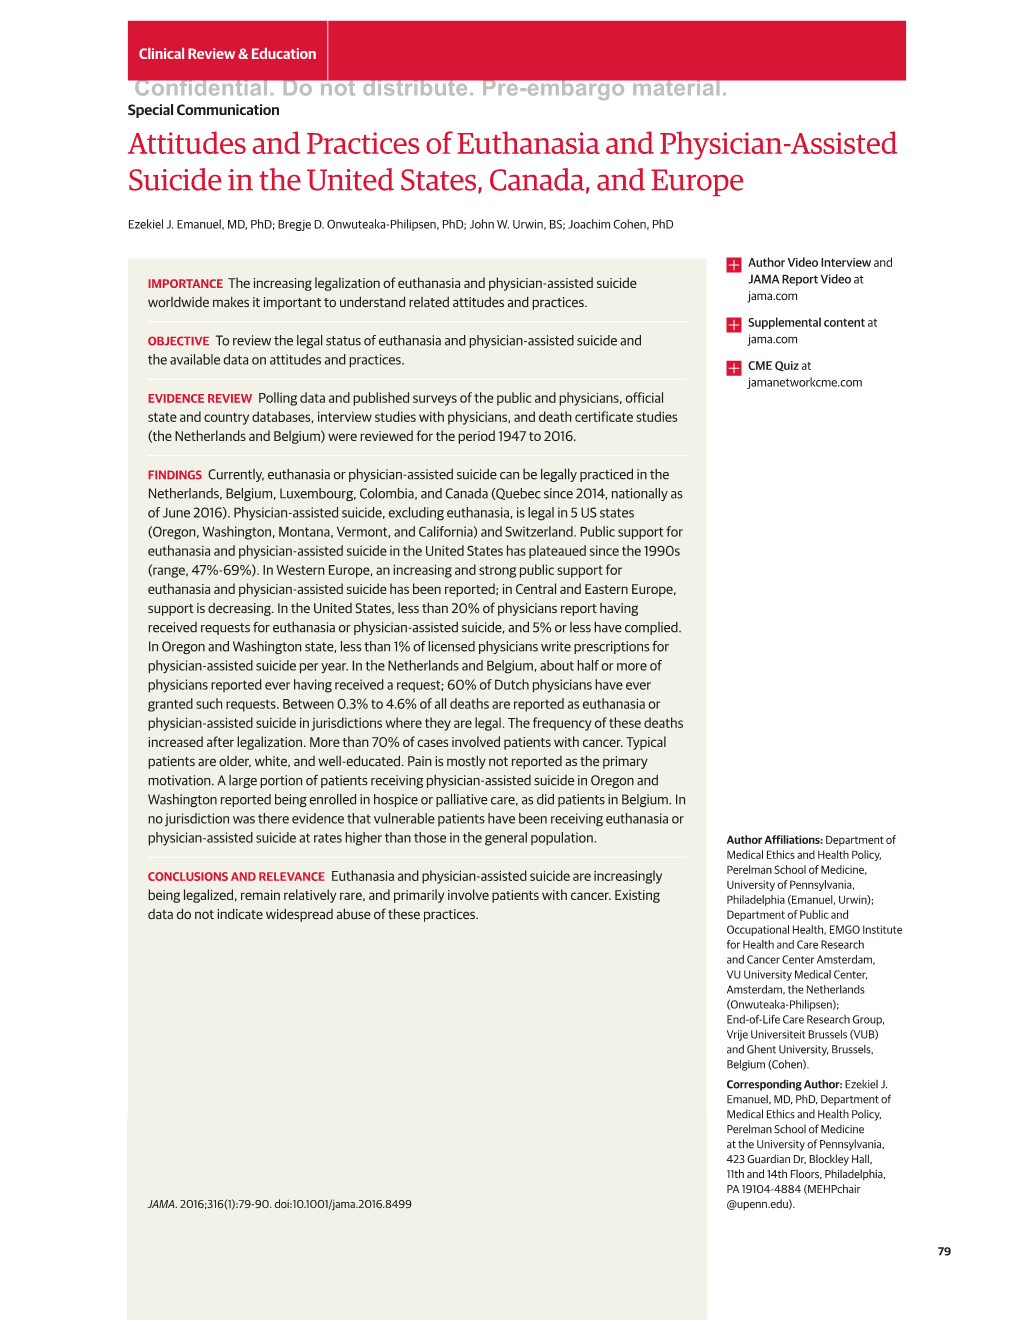 Attitudes and Practices of Euthanasia and Physician-Assisted Suicide in the United States, Canada, and Europe